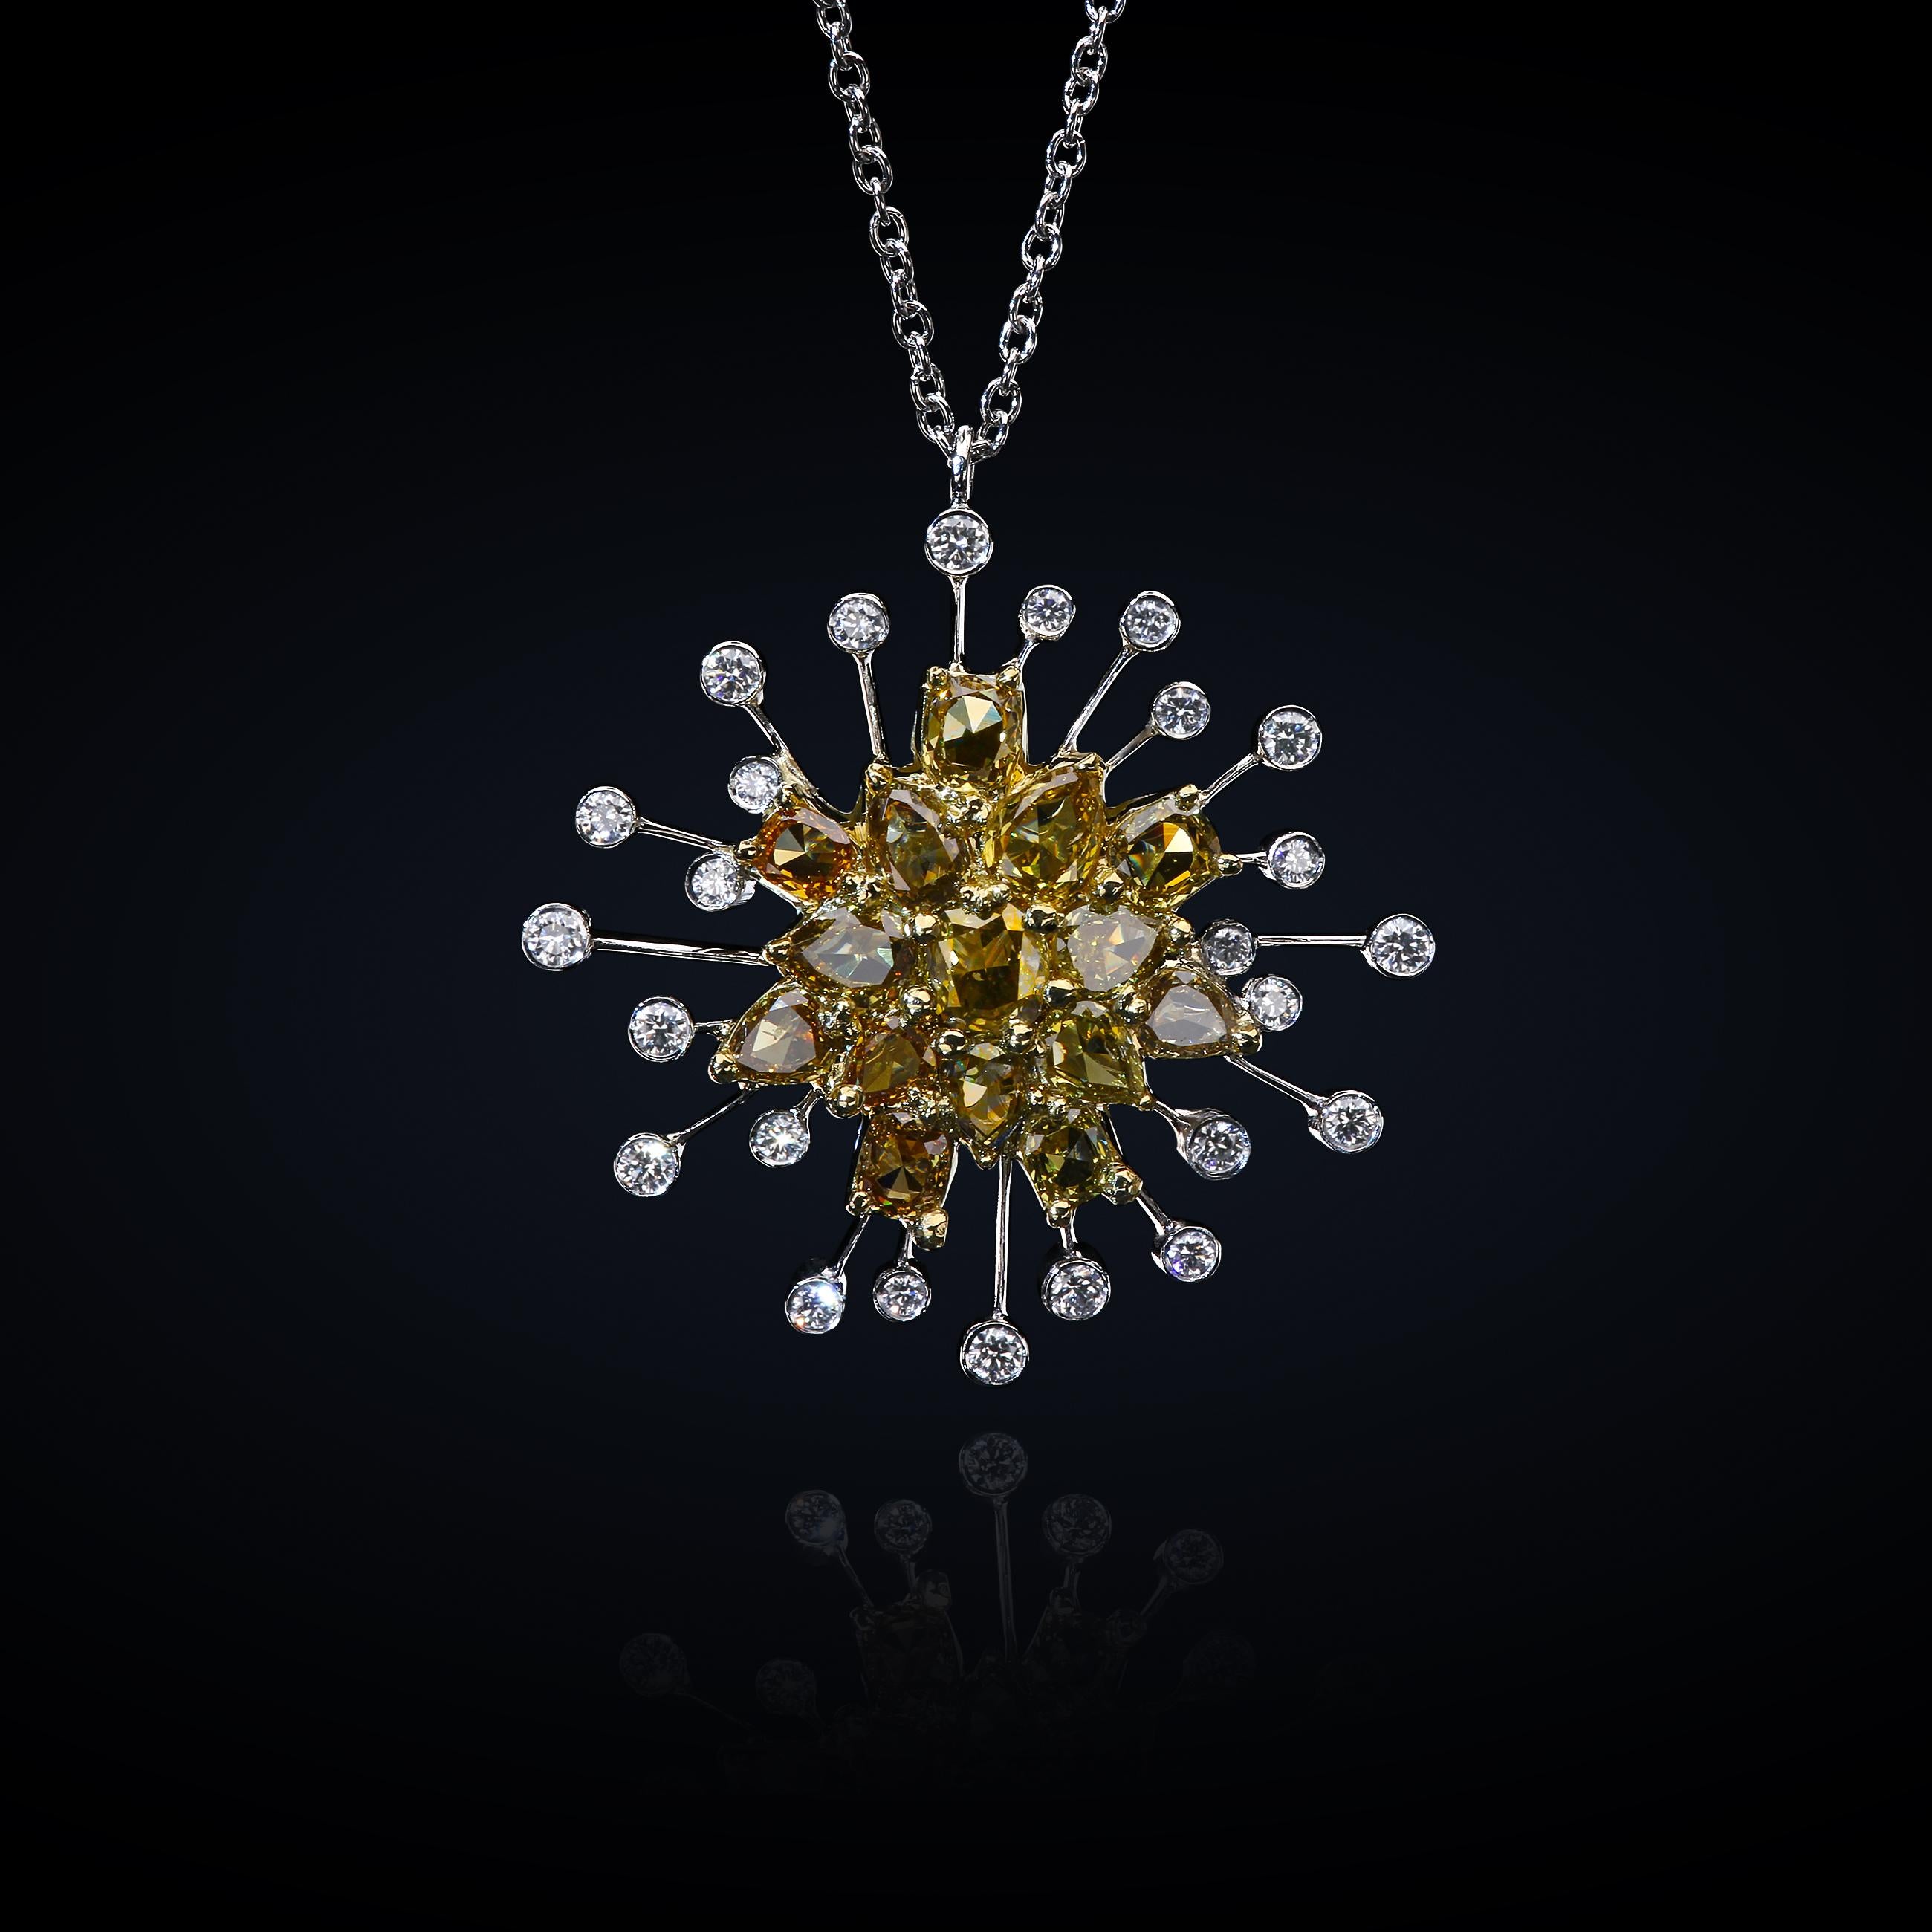 Platinum and 18K yellow gold pendant set with natural Caramel Diamonds™ in the center, and white full-cut diamonds bursting at the center.
The pendant is suspended on an 18